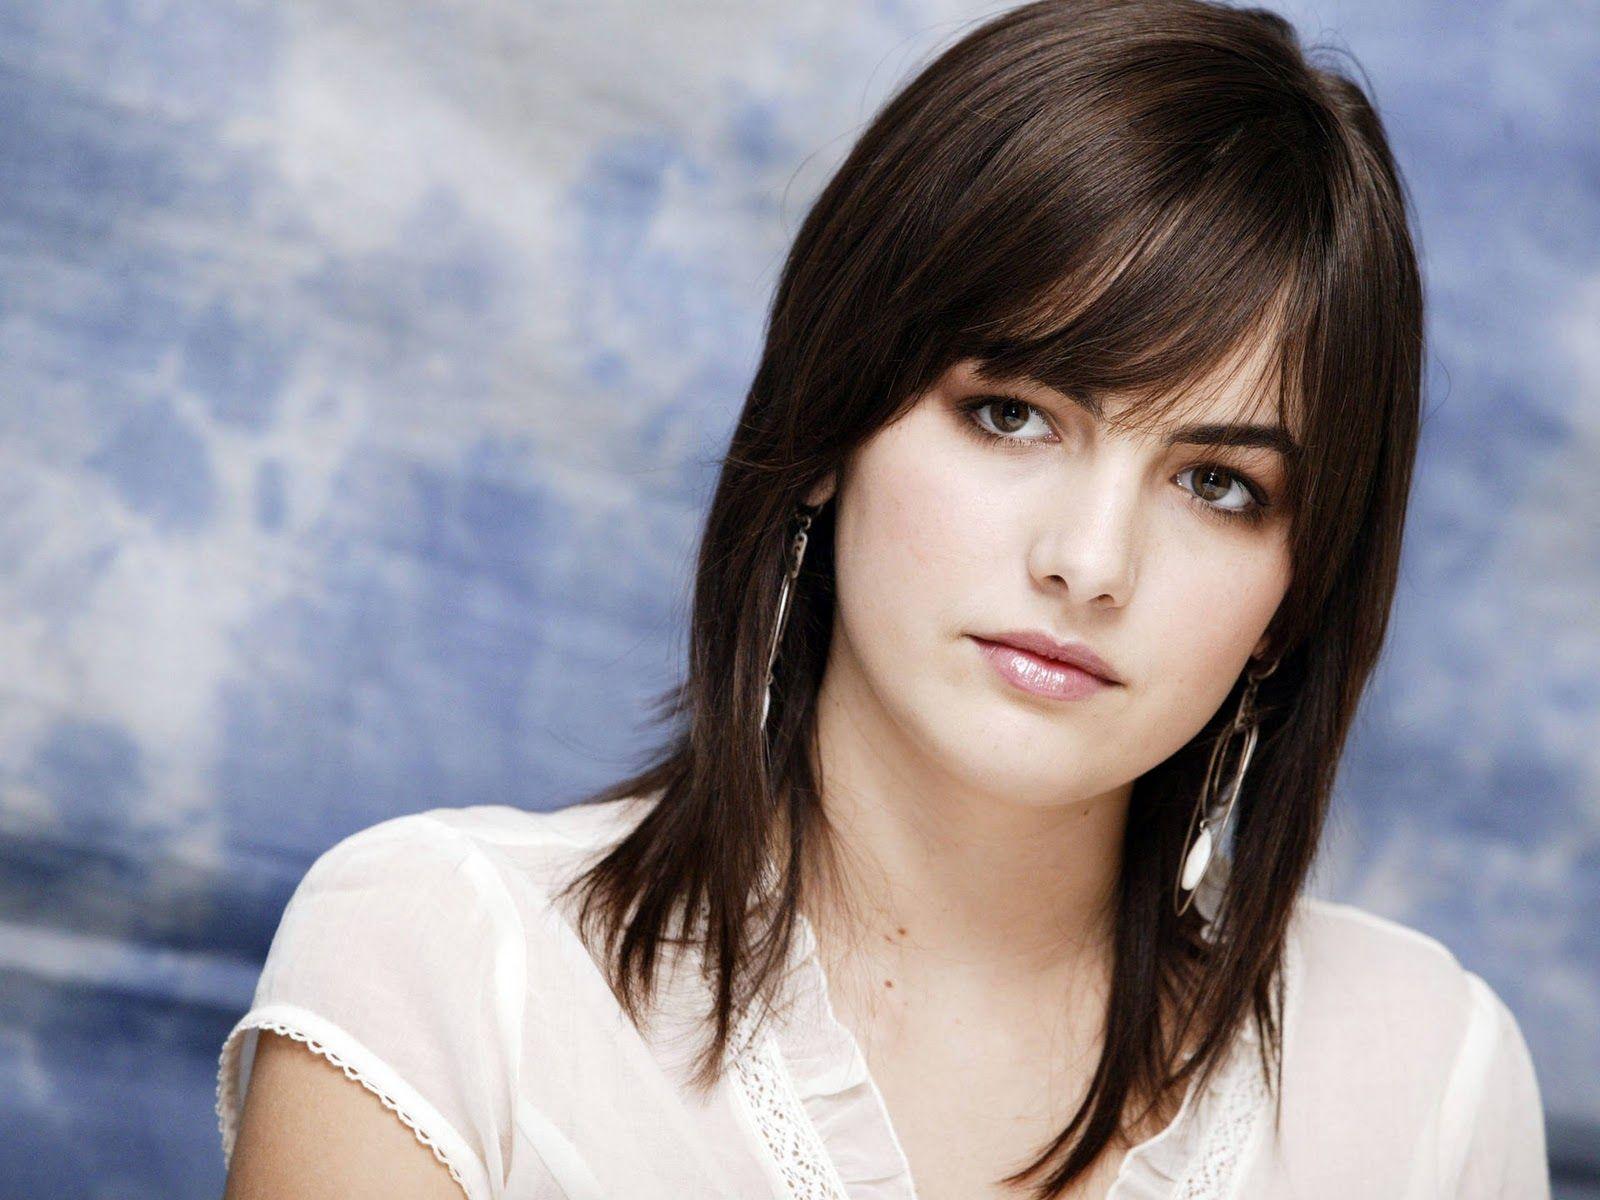 Hollywood Actress Wallpaper, Find best latest Hollywood Actress